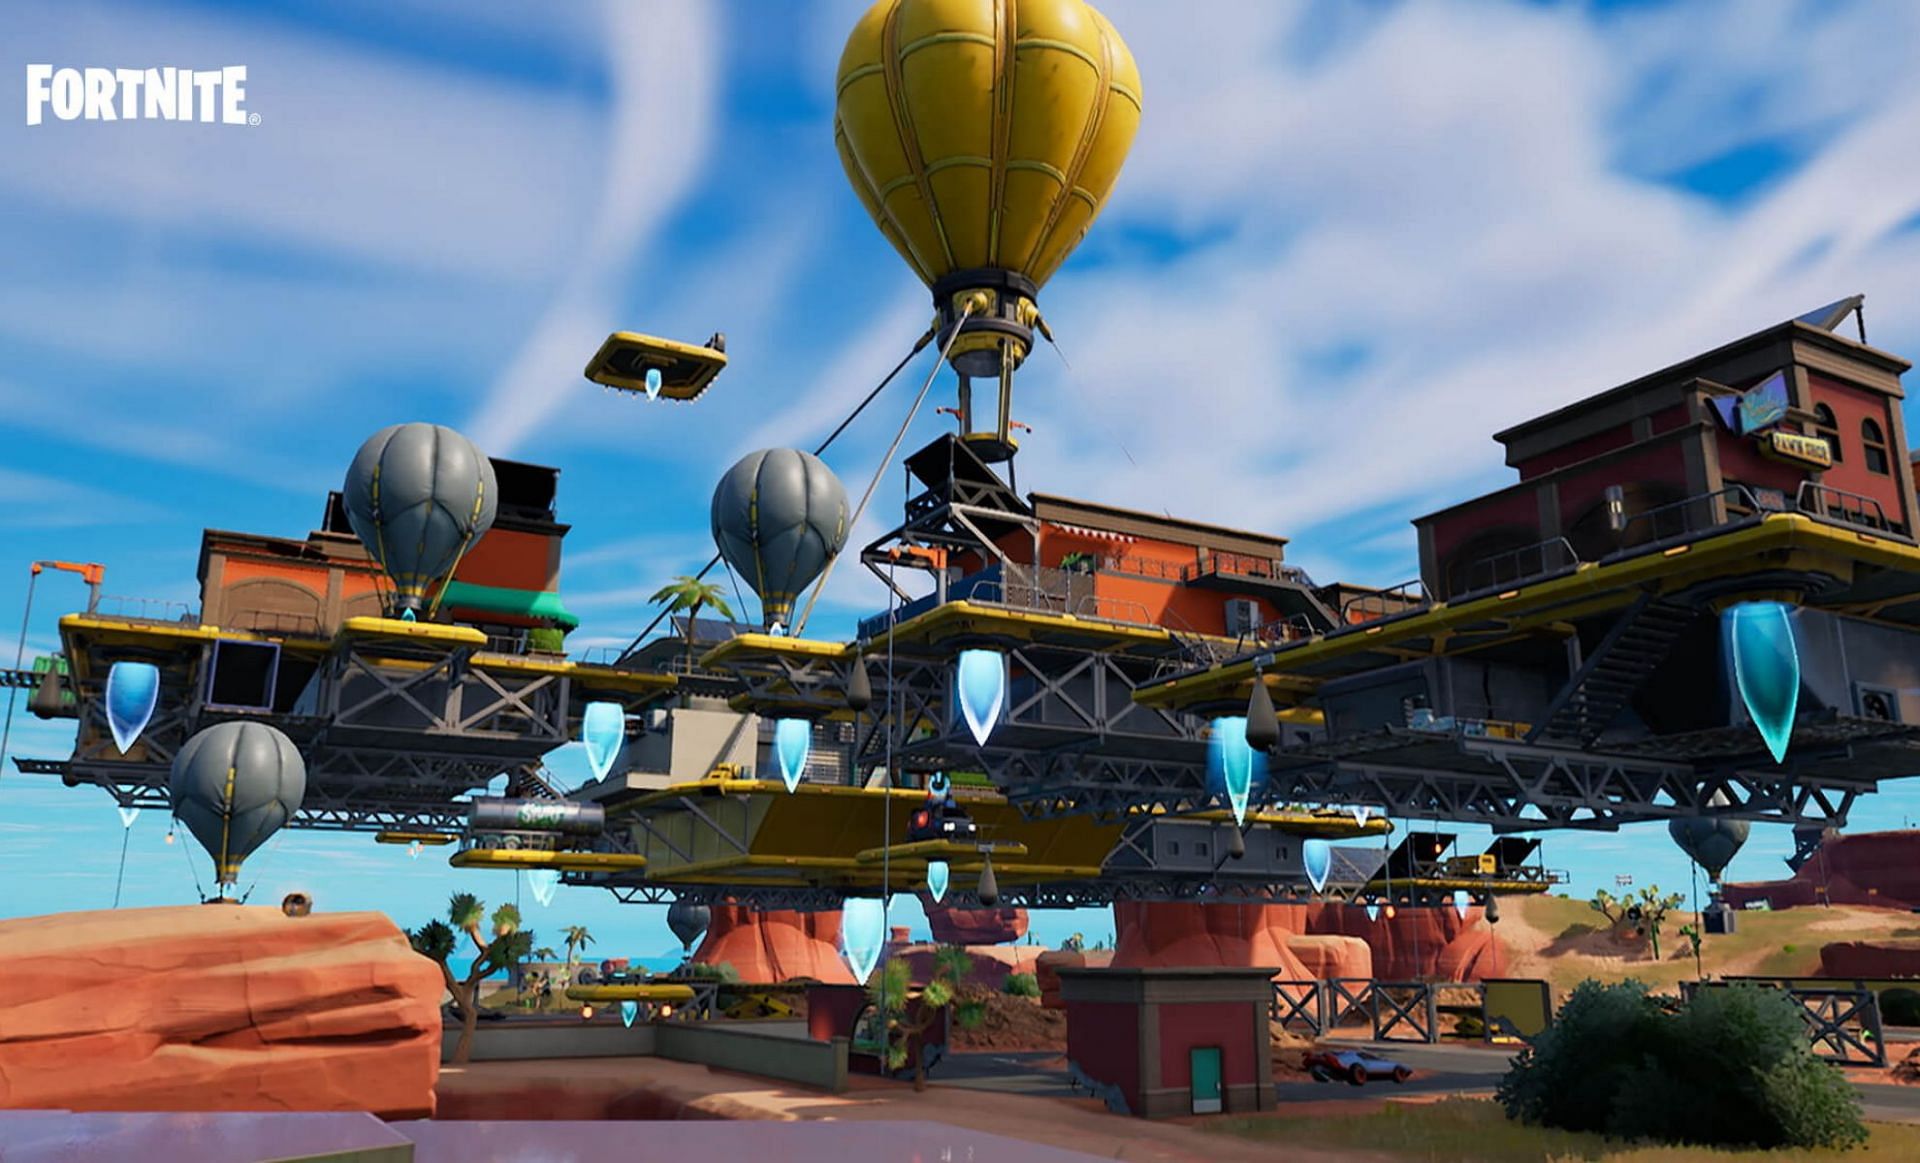 Cloudy Condo might float away this season (Image via Epic Games)